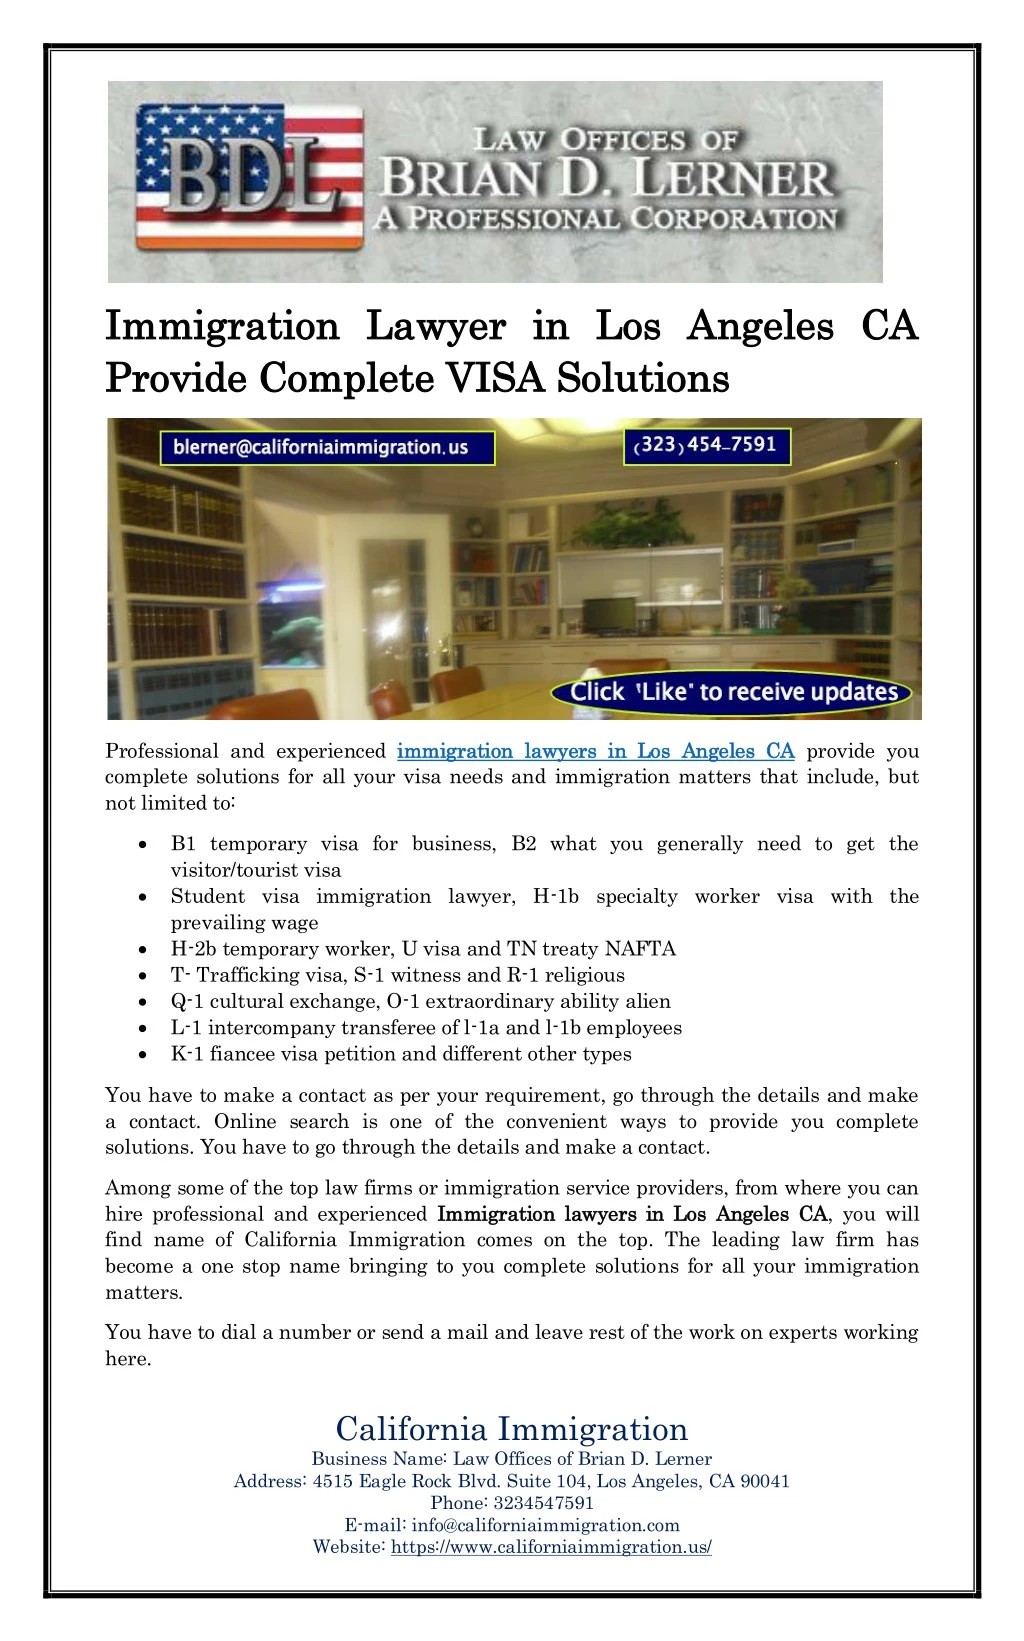 immigration lawyer in los angeles ca immigration